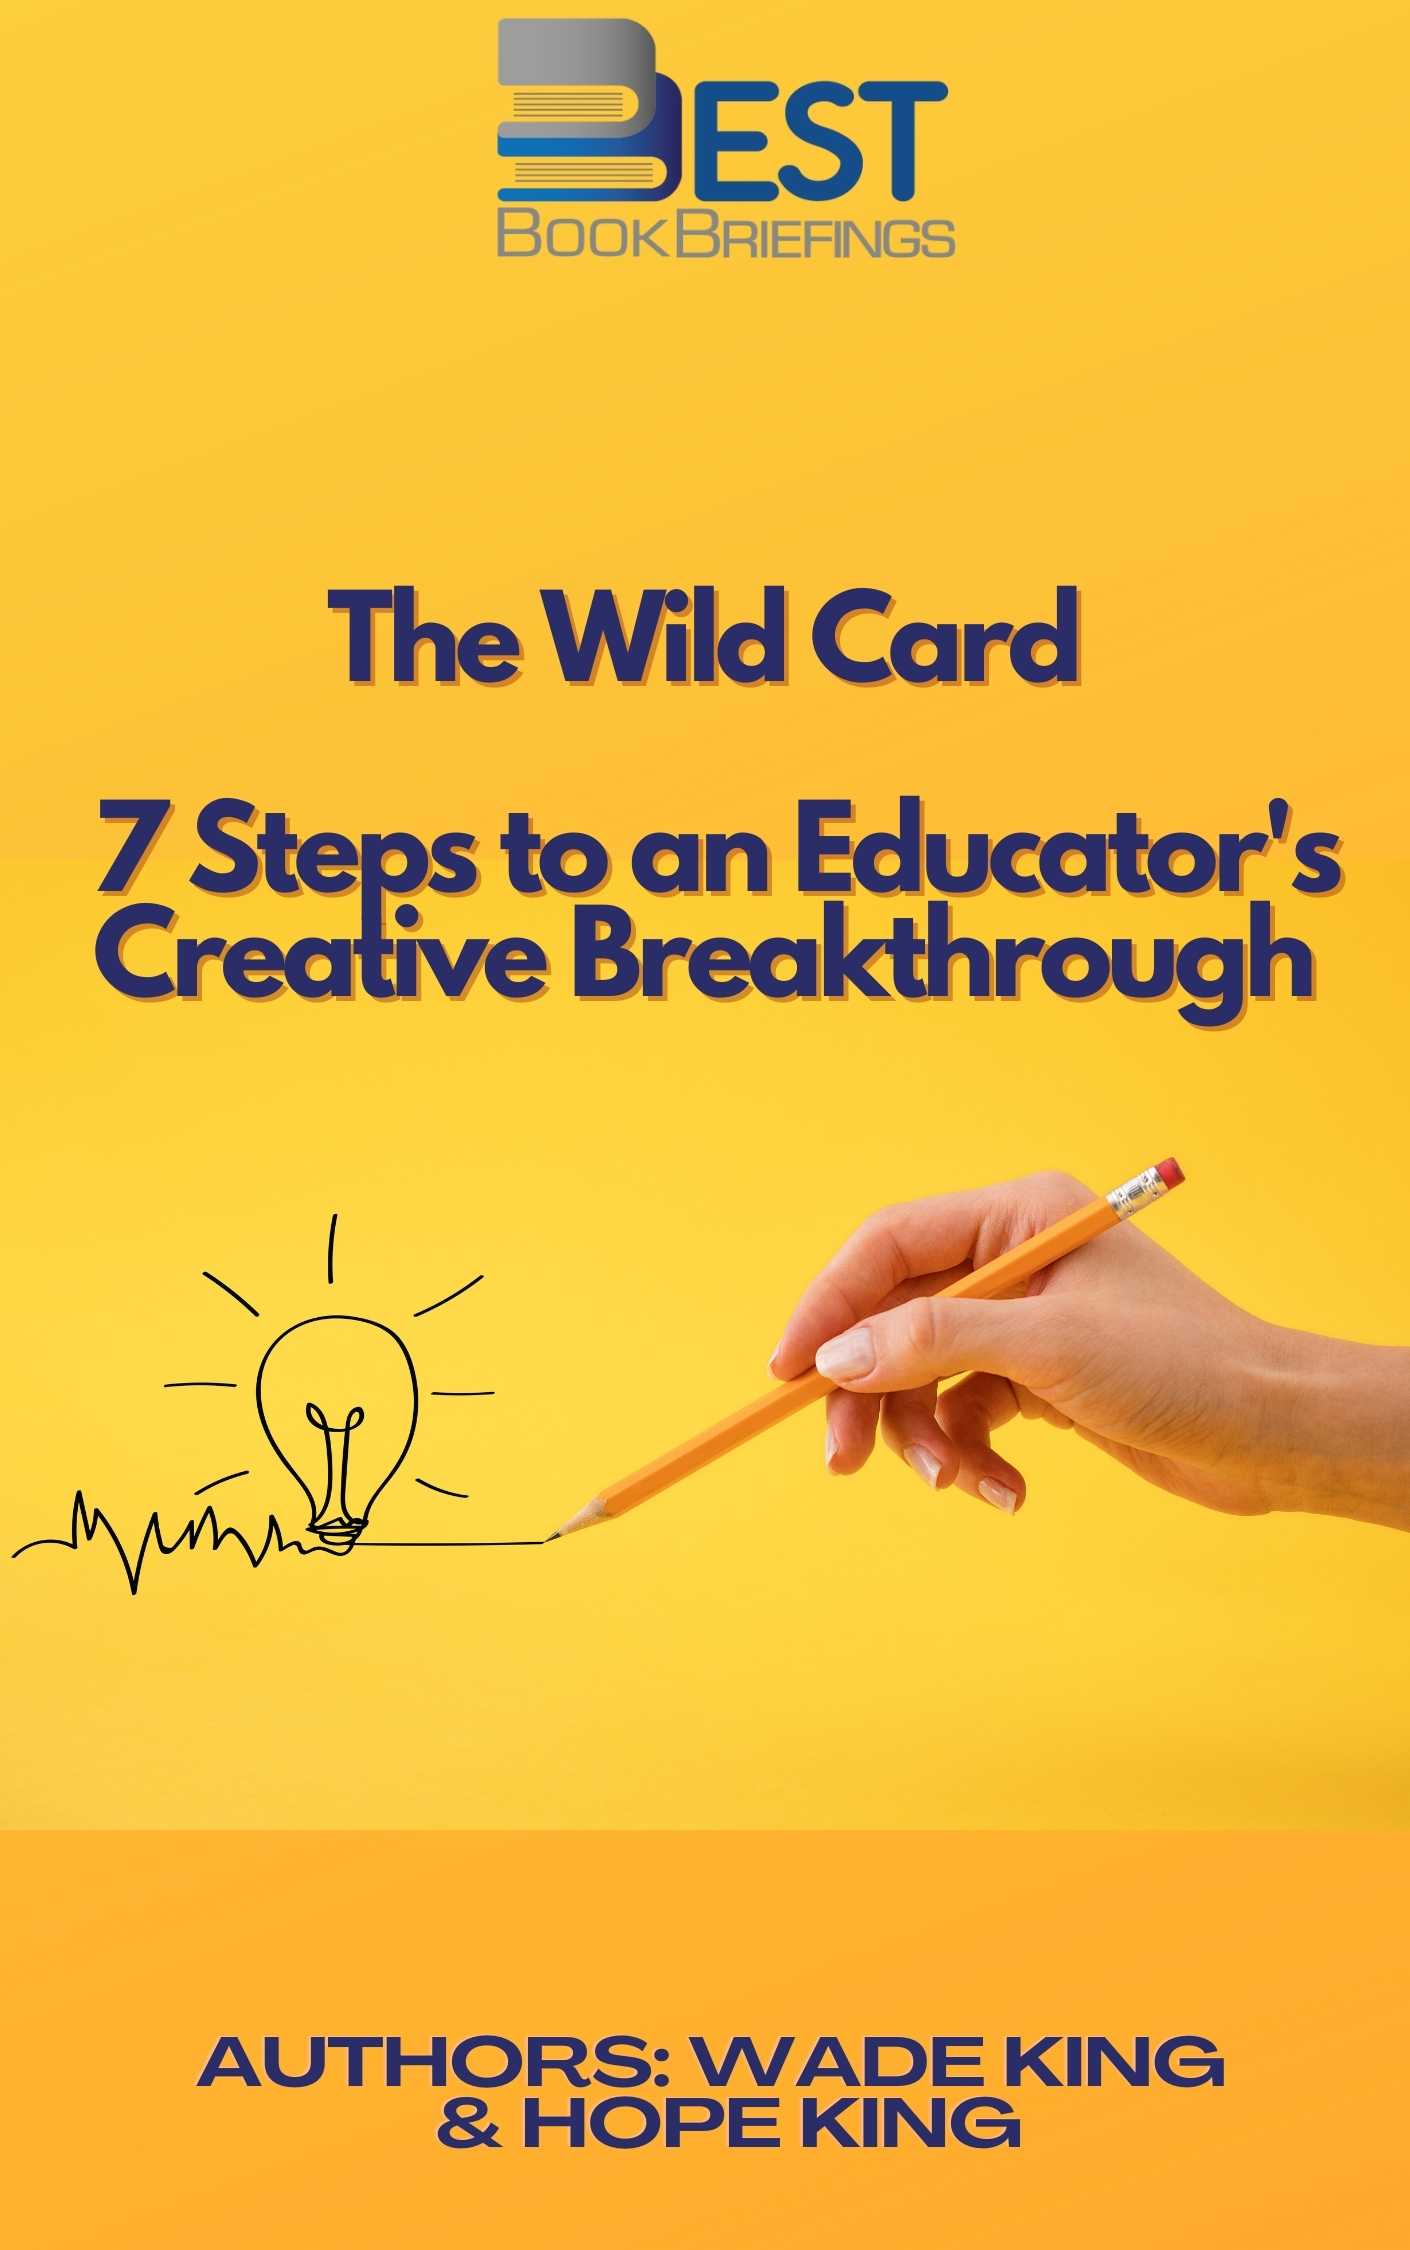 The Wild Card is your step-by-step guide to experiencing a creative breakthrough in your classroom with your students. Wade and Hope King show you how to draw on your authentic self—your past experiences, personality quirks, interests, hobbies, and strengths—to deliver your content creatively. Whether you are a high school teacher or 